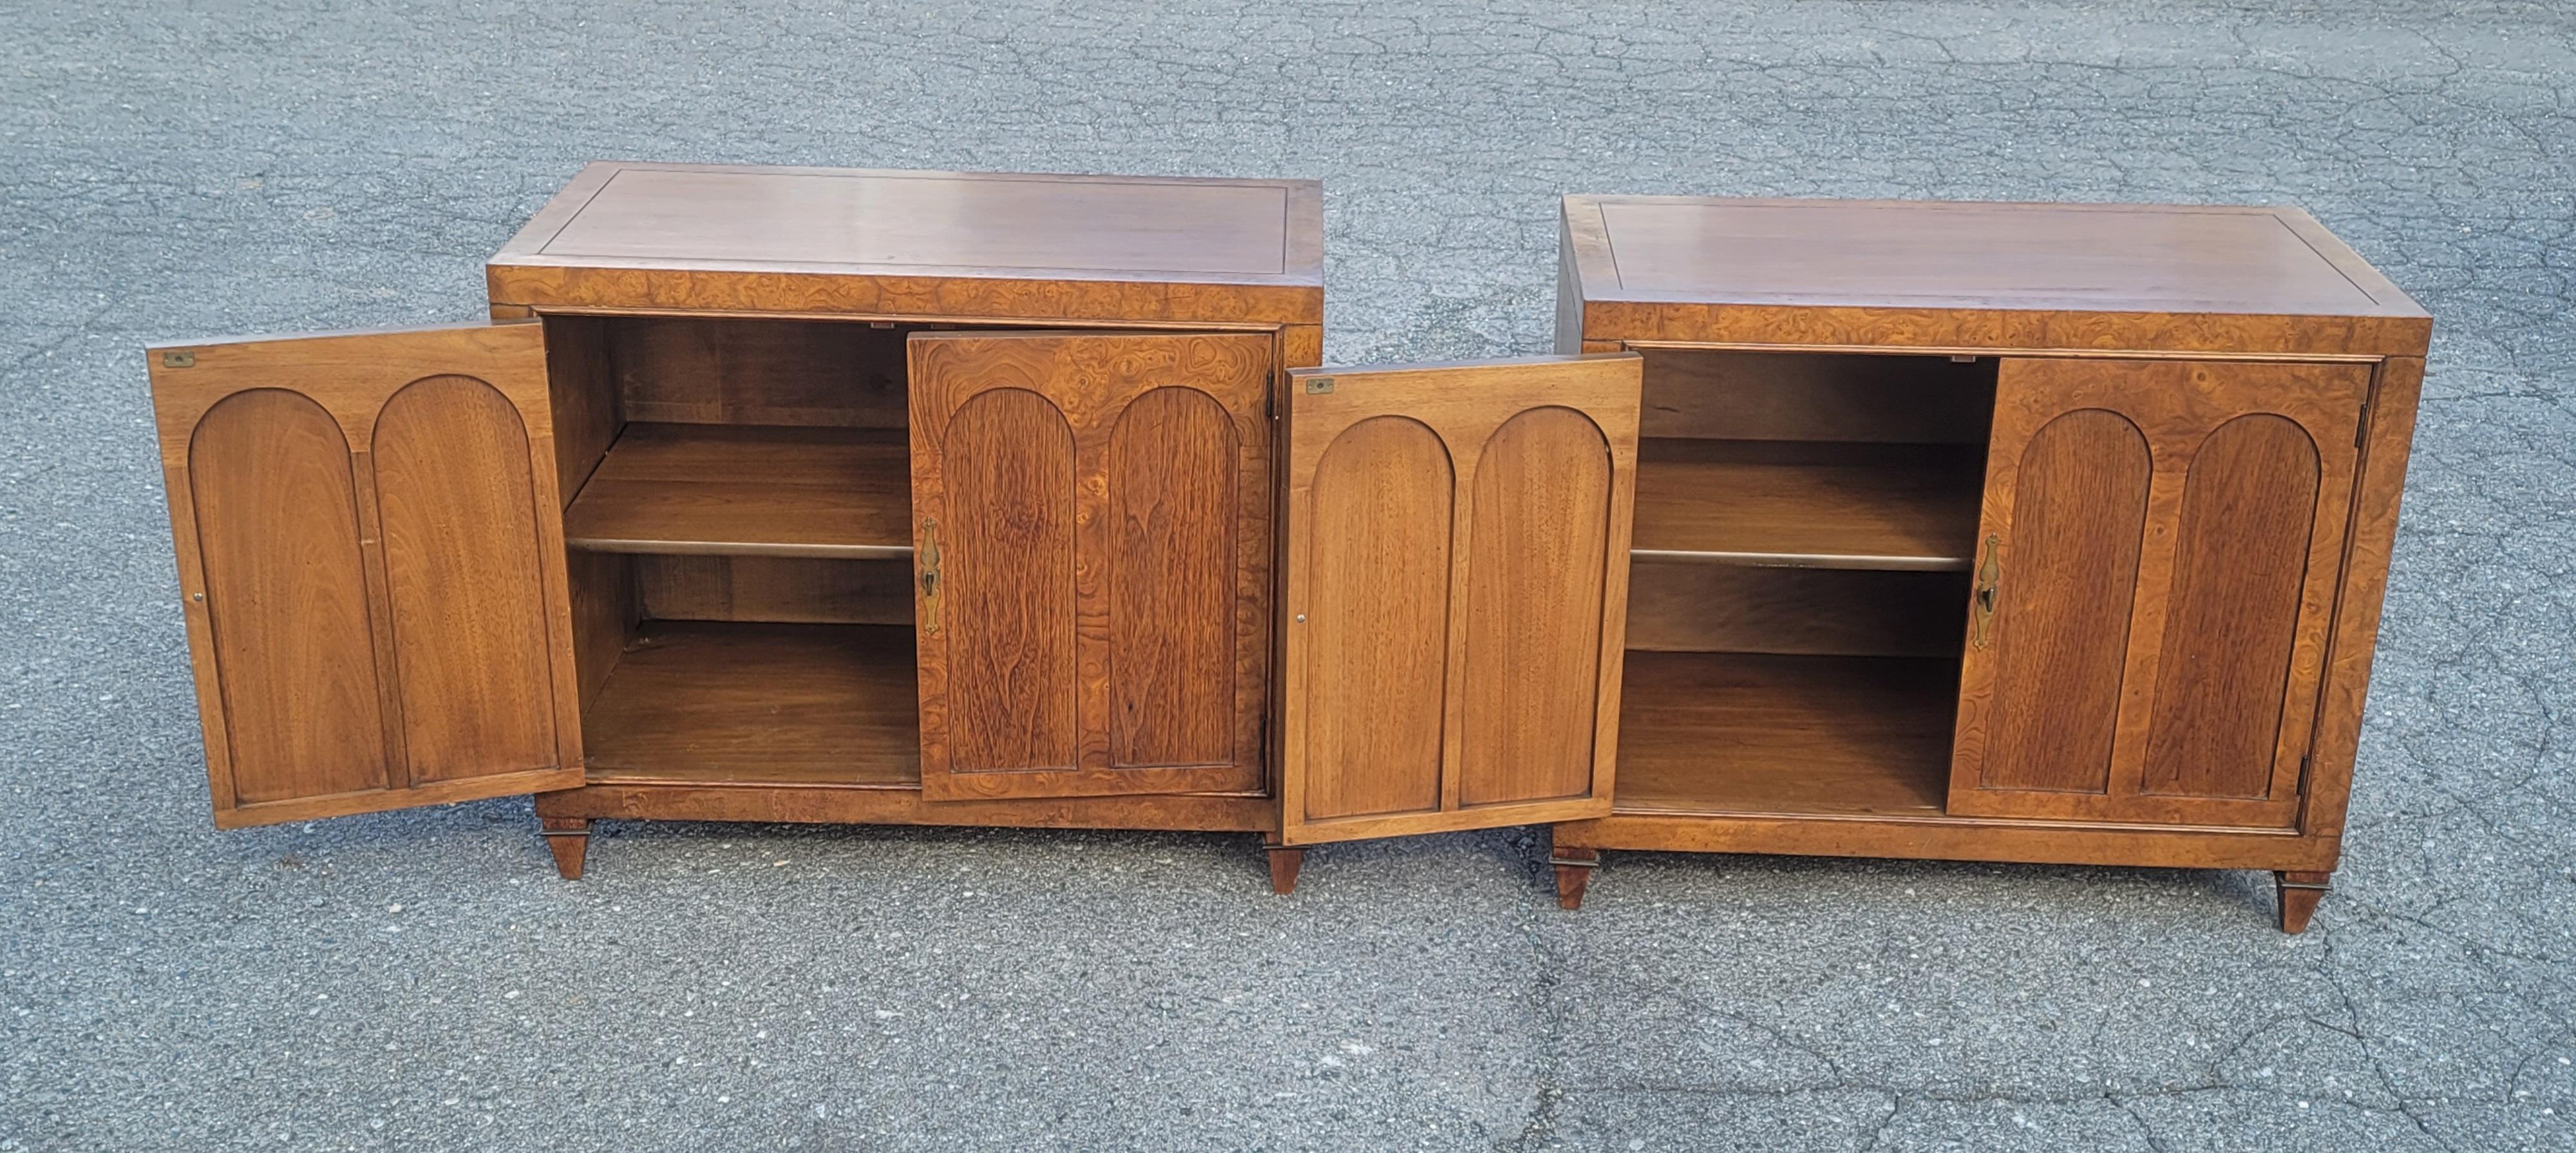 Pair of Mastercraft Burled and Walnut Colonnade Cabinets Credenza Buffet Server For Sale 4